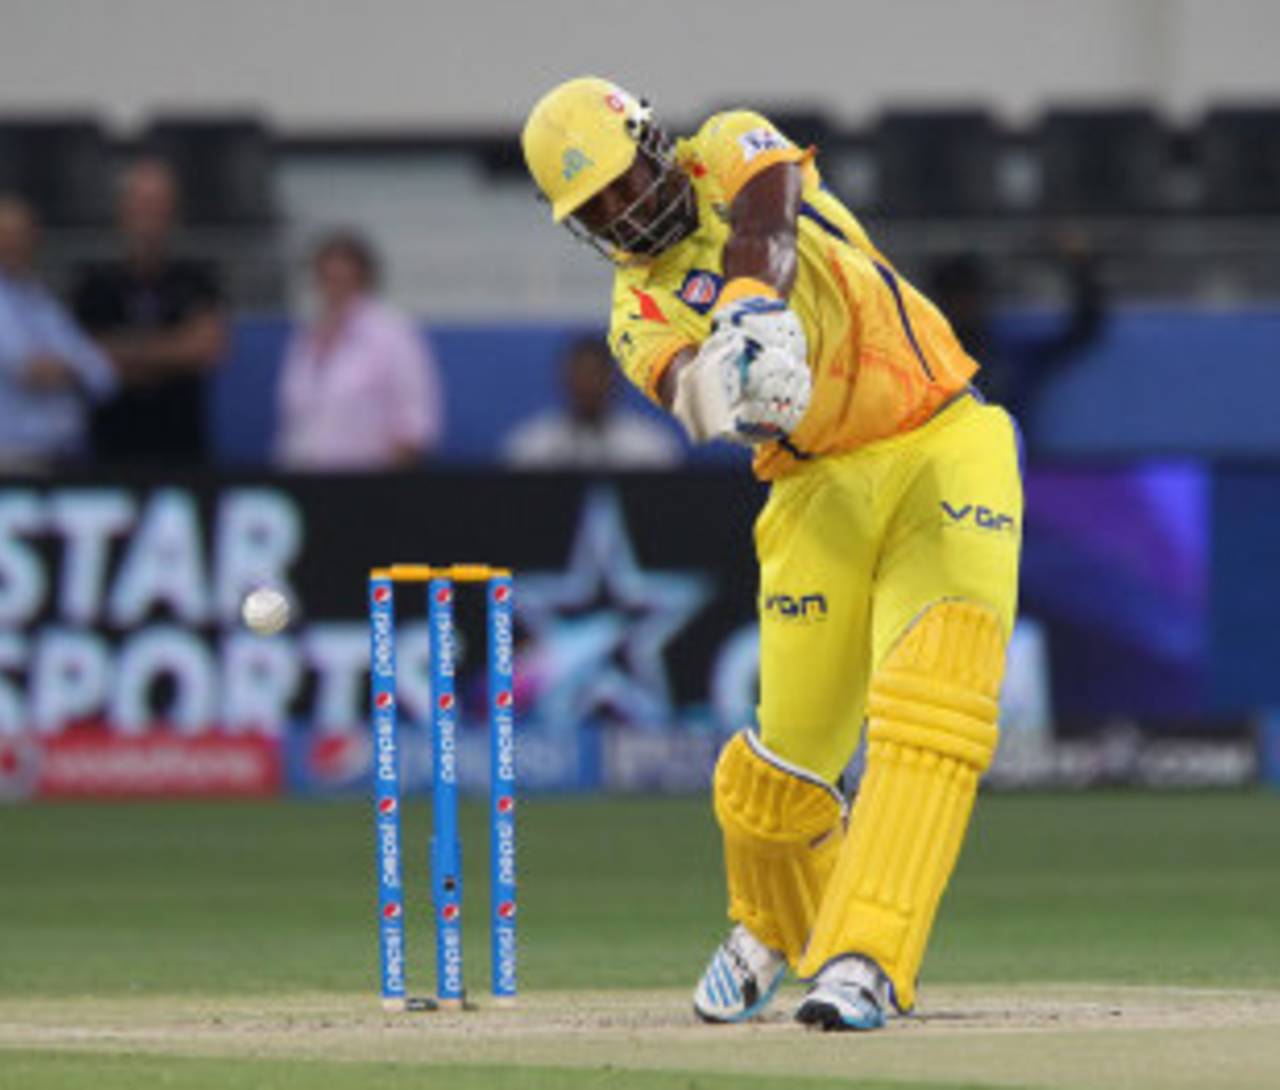 Dwayne Smith smashed five sixes and four fours in his quickfire knock of 66&nbsp;&nbsp;&bull;&nbsp;&nbsp;BCCI